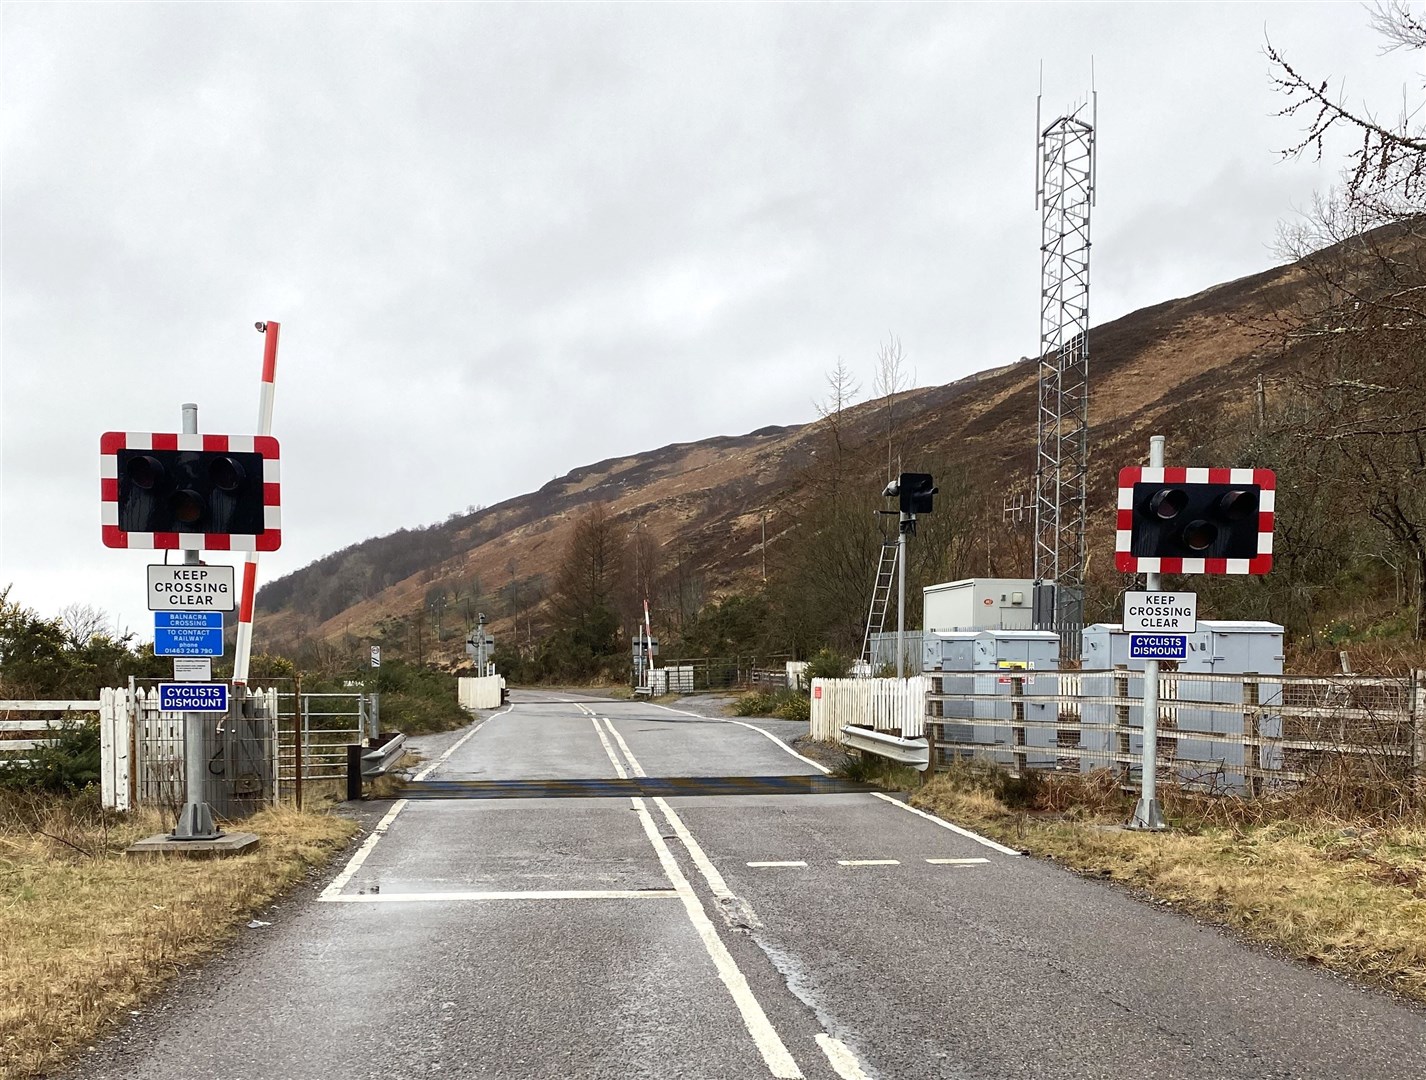 The level crossing safety inspection is scheduled over just one night from Sunday into Monday, September 25.